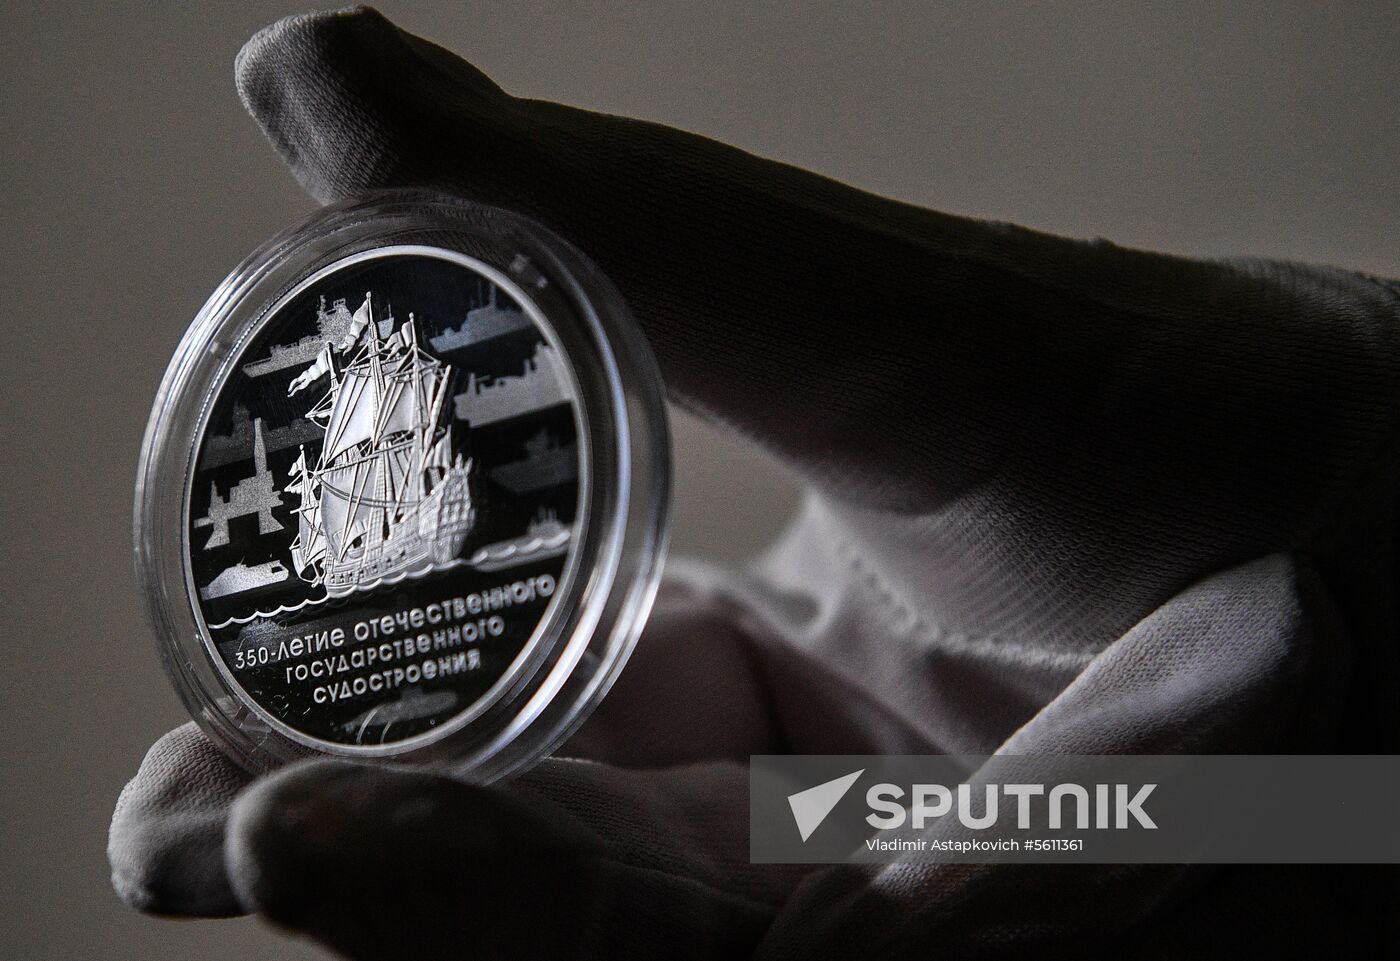 Bank of Russia presents commemorative coins